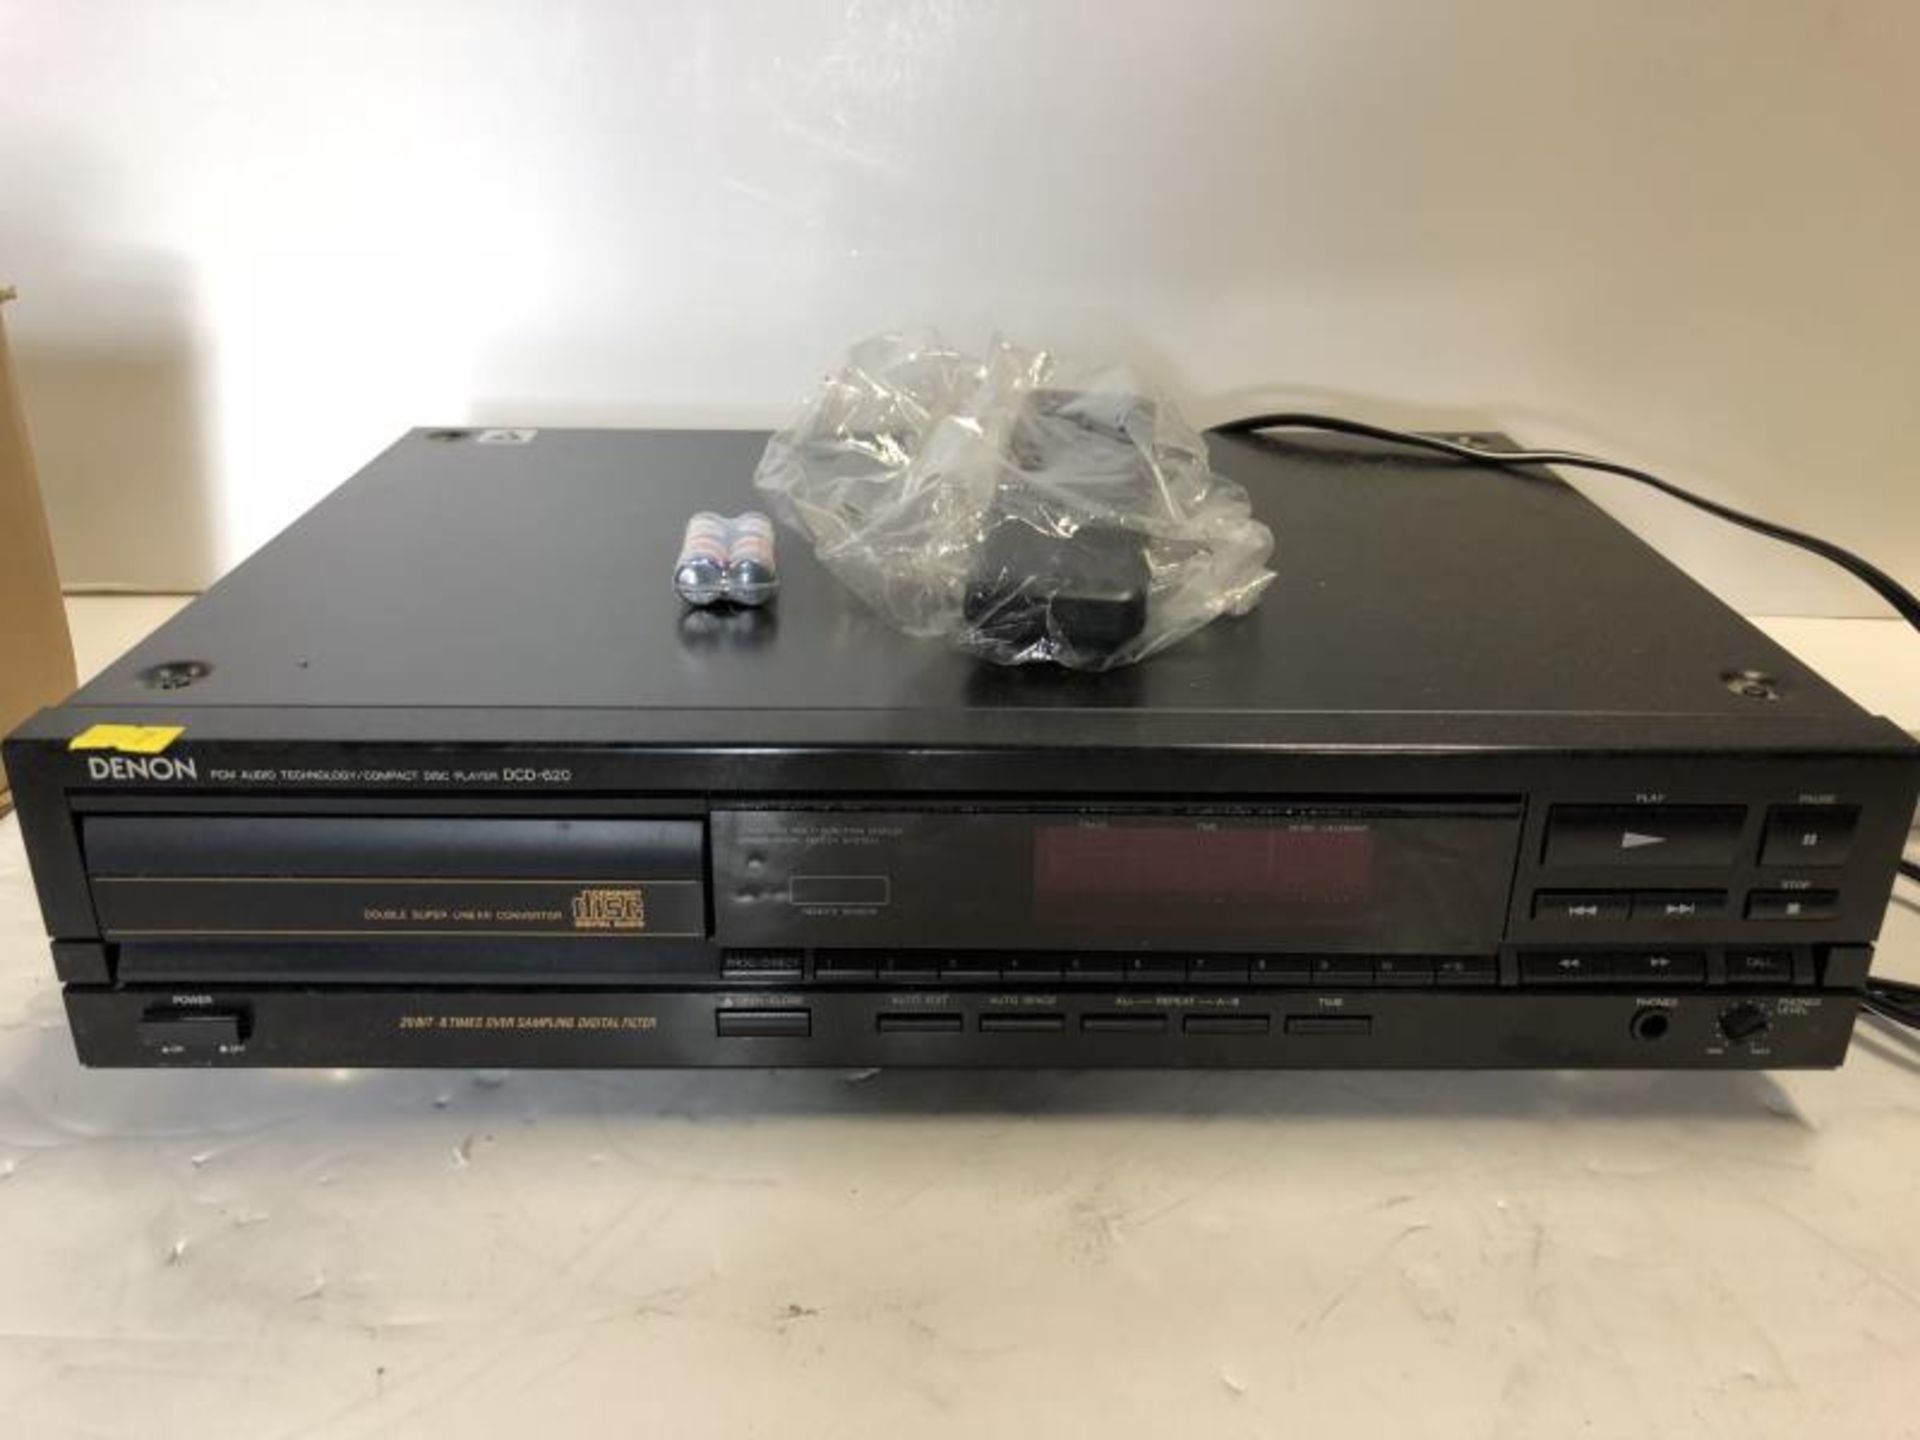 Denon model DCD 620 CD player, with remote, in orig box, tested - powers up